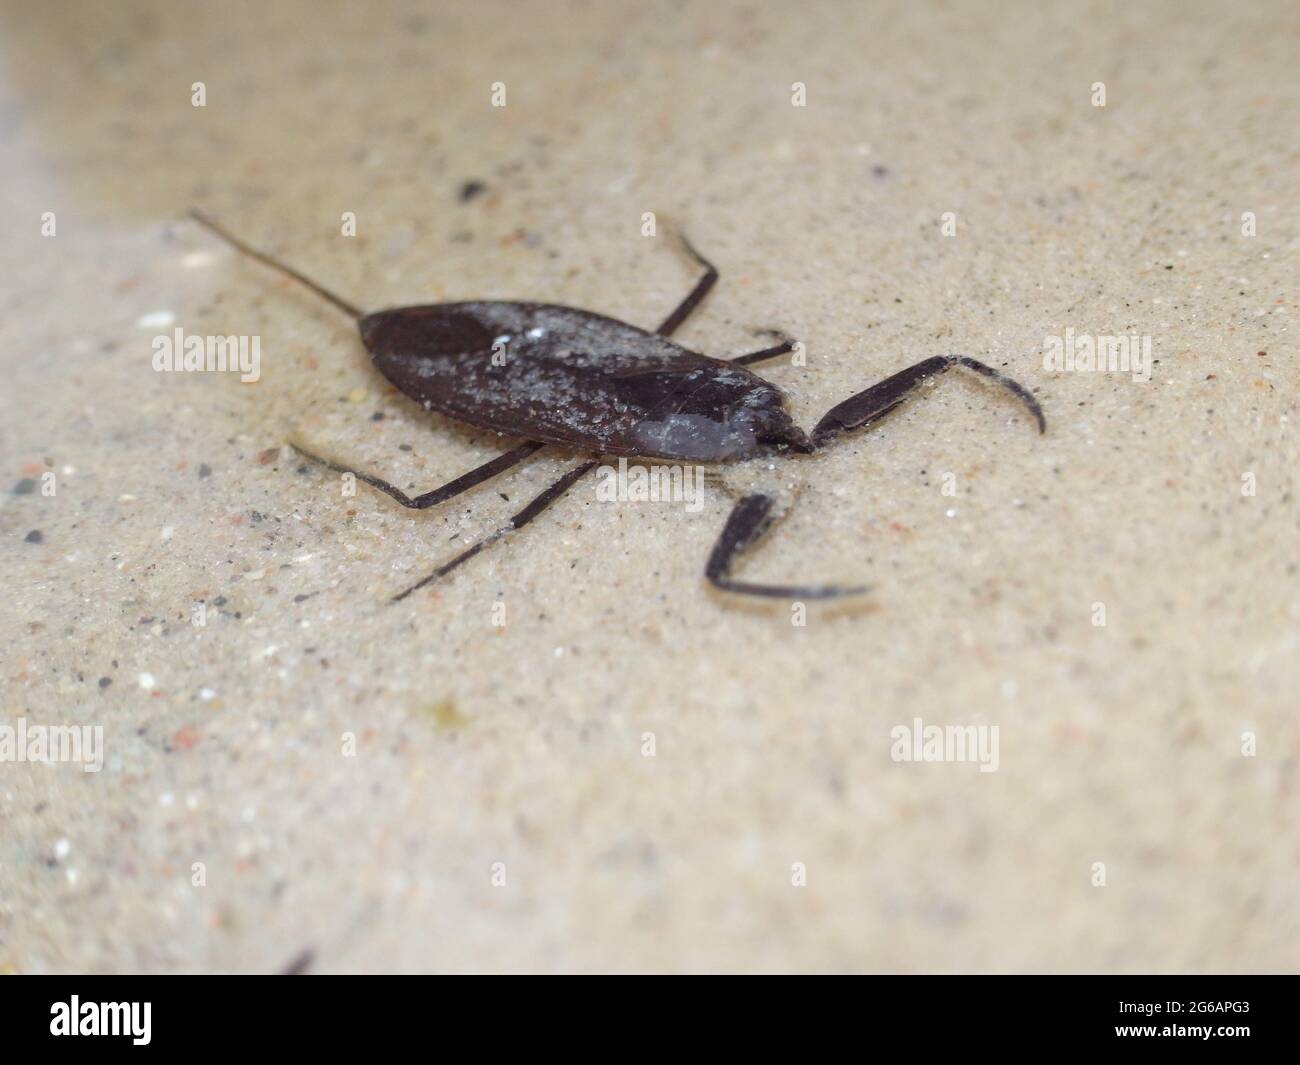 Water scorpion (Nepa cinerea). Predatory aquatic bug in the family Nepidae, with caudal process that acts as breathing tube. Stock Photo